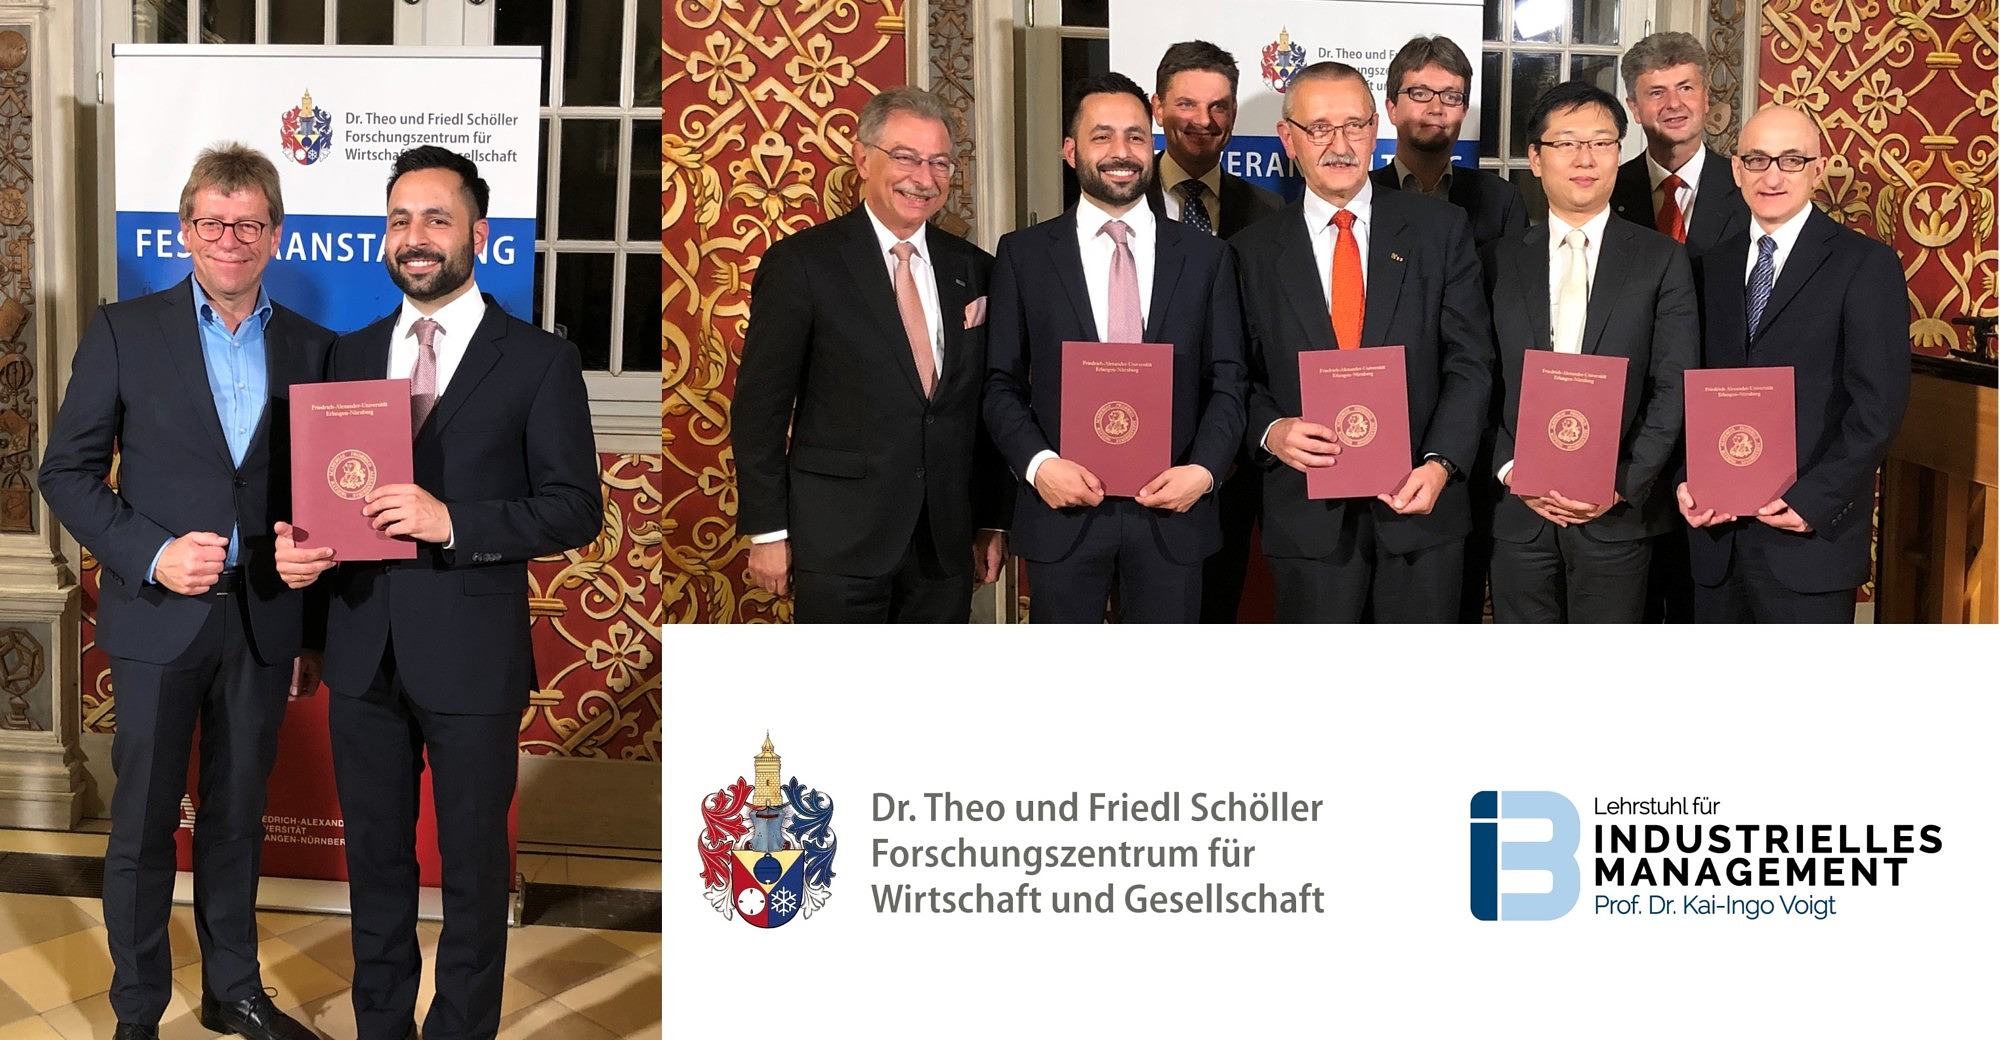 Towards entry "Great honor: Dr. Christian Baccarella awarded with Schöller Fellowship 2019"